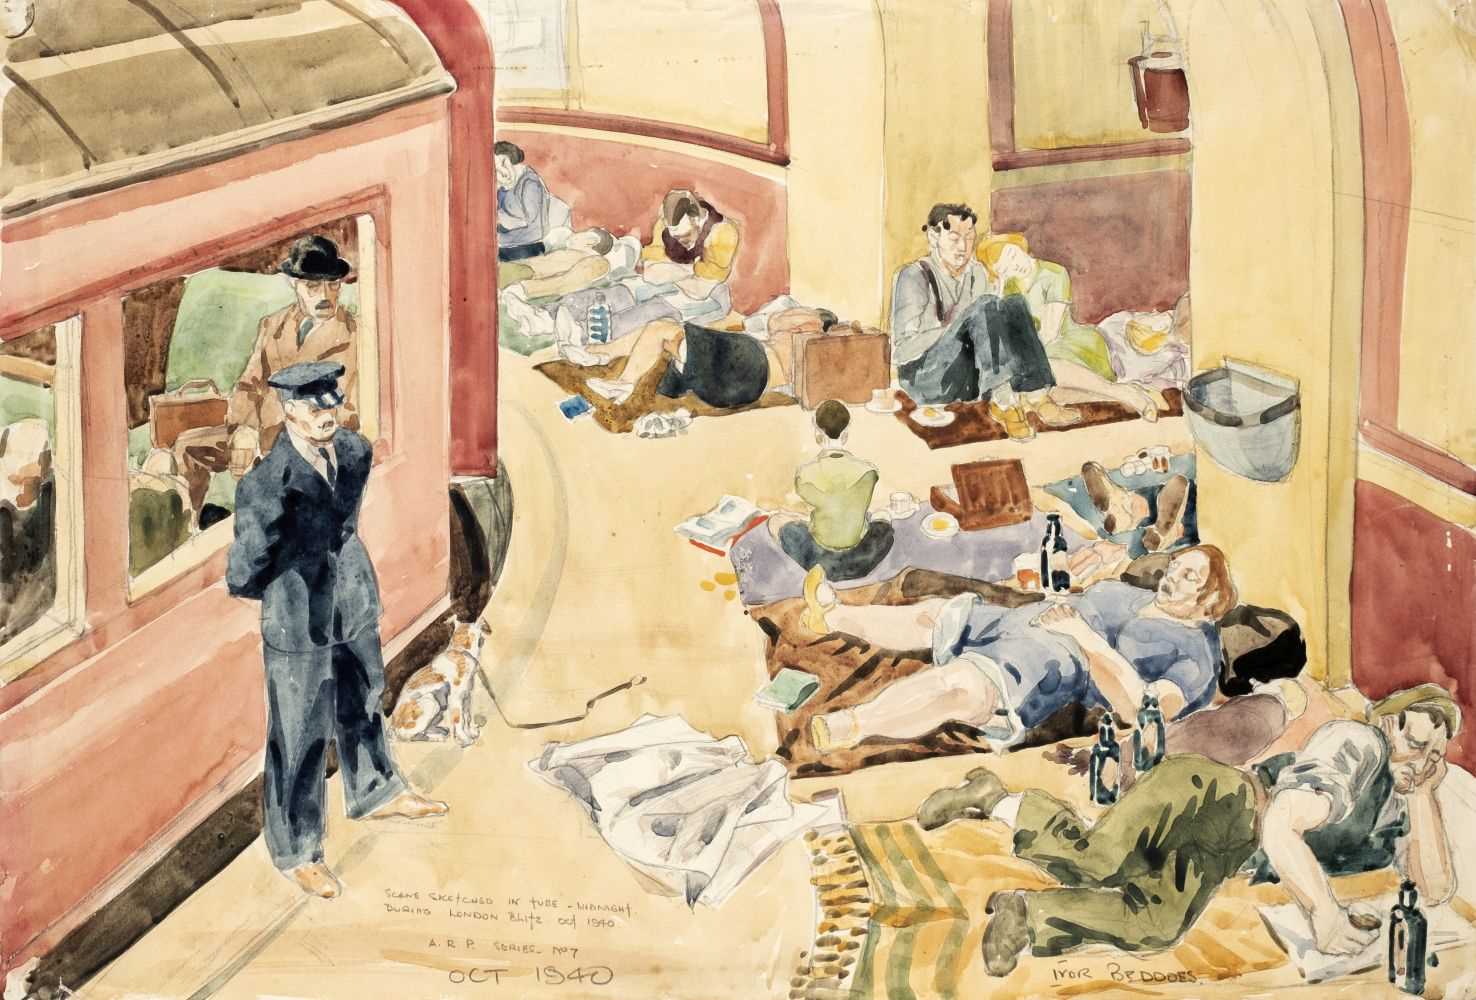 Lot 279 - Beddoes (Ivor, 1909-1981). A group of watercolour & pencil drawings of scenes from the London Blitz